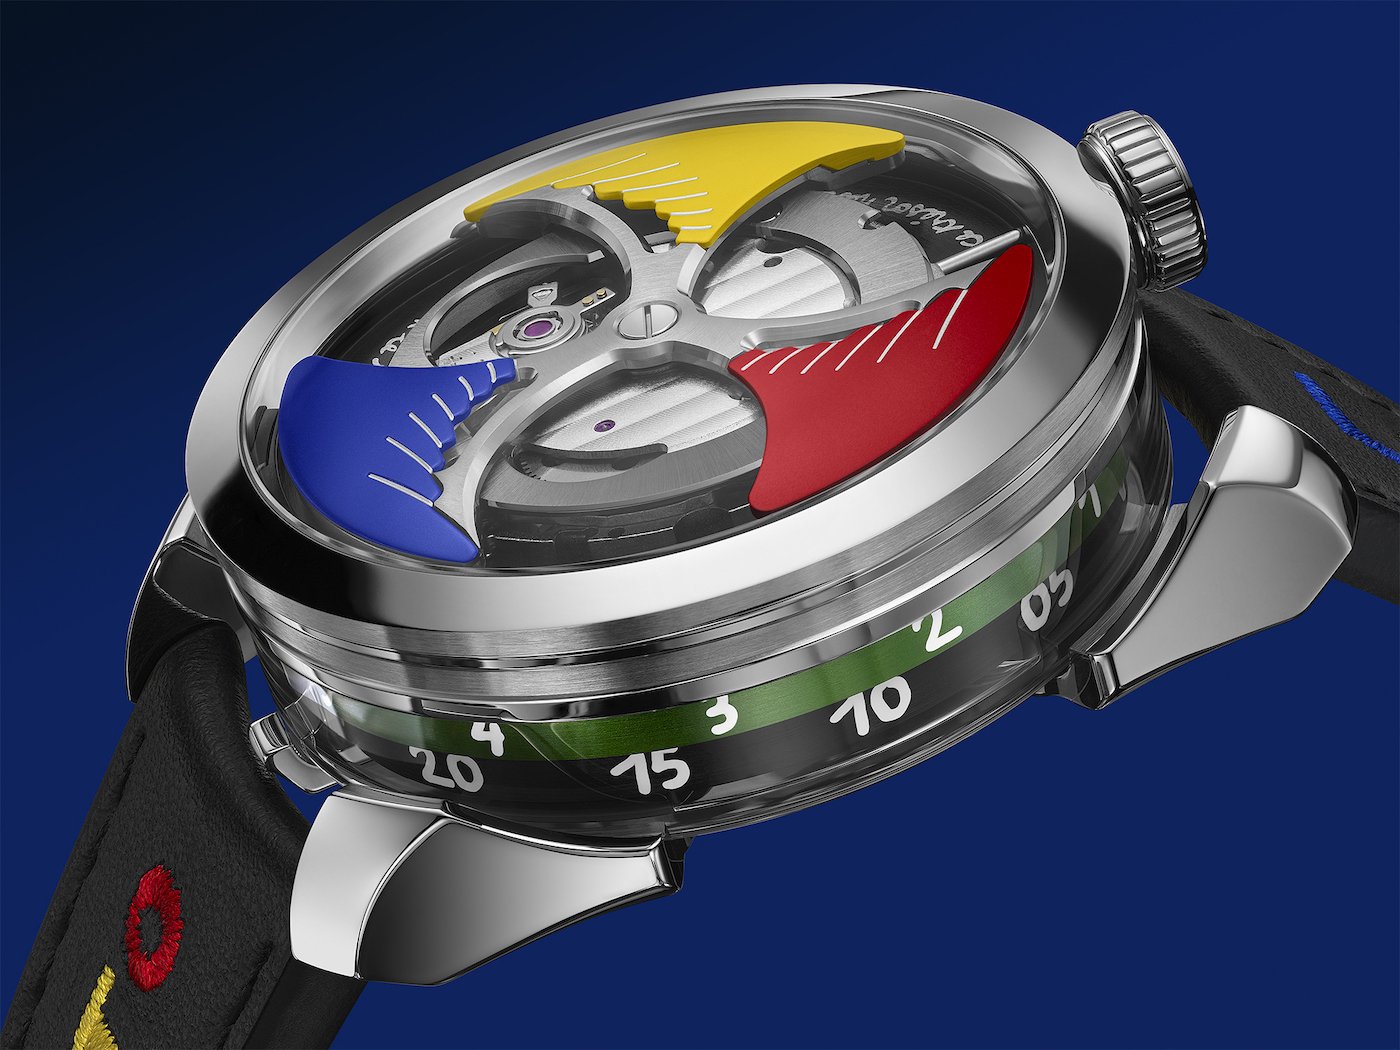 M.A.D.Editions' first collaboration watch with Jean Charles de Castelbajac